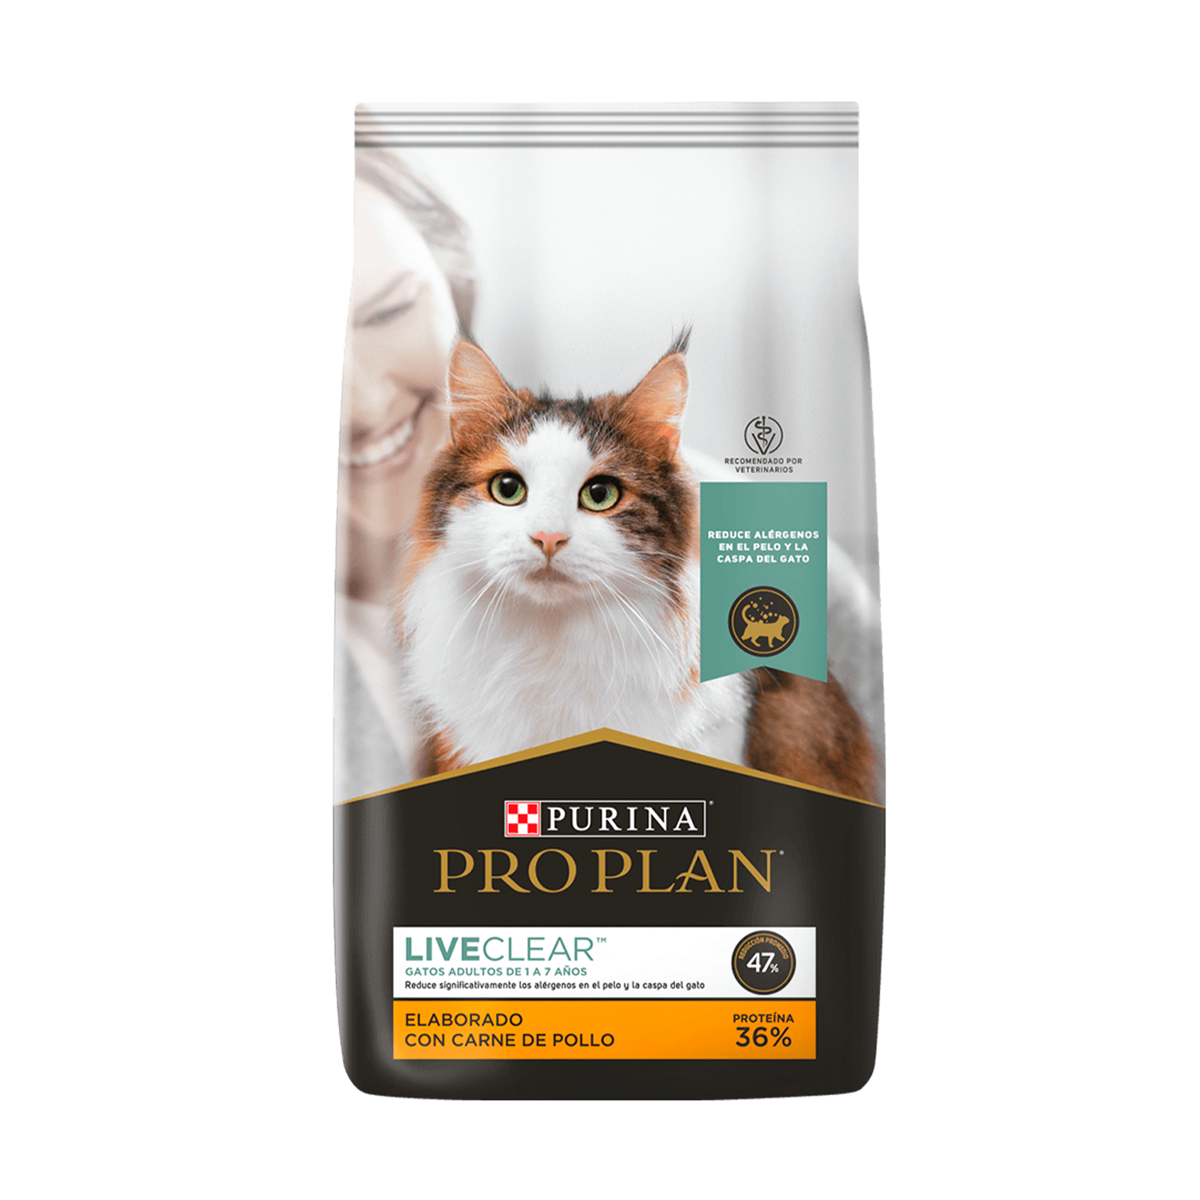 ProPlan-Liveclear-01.png